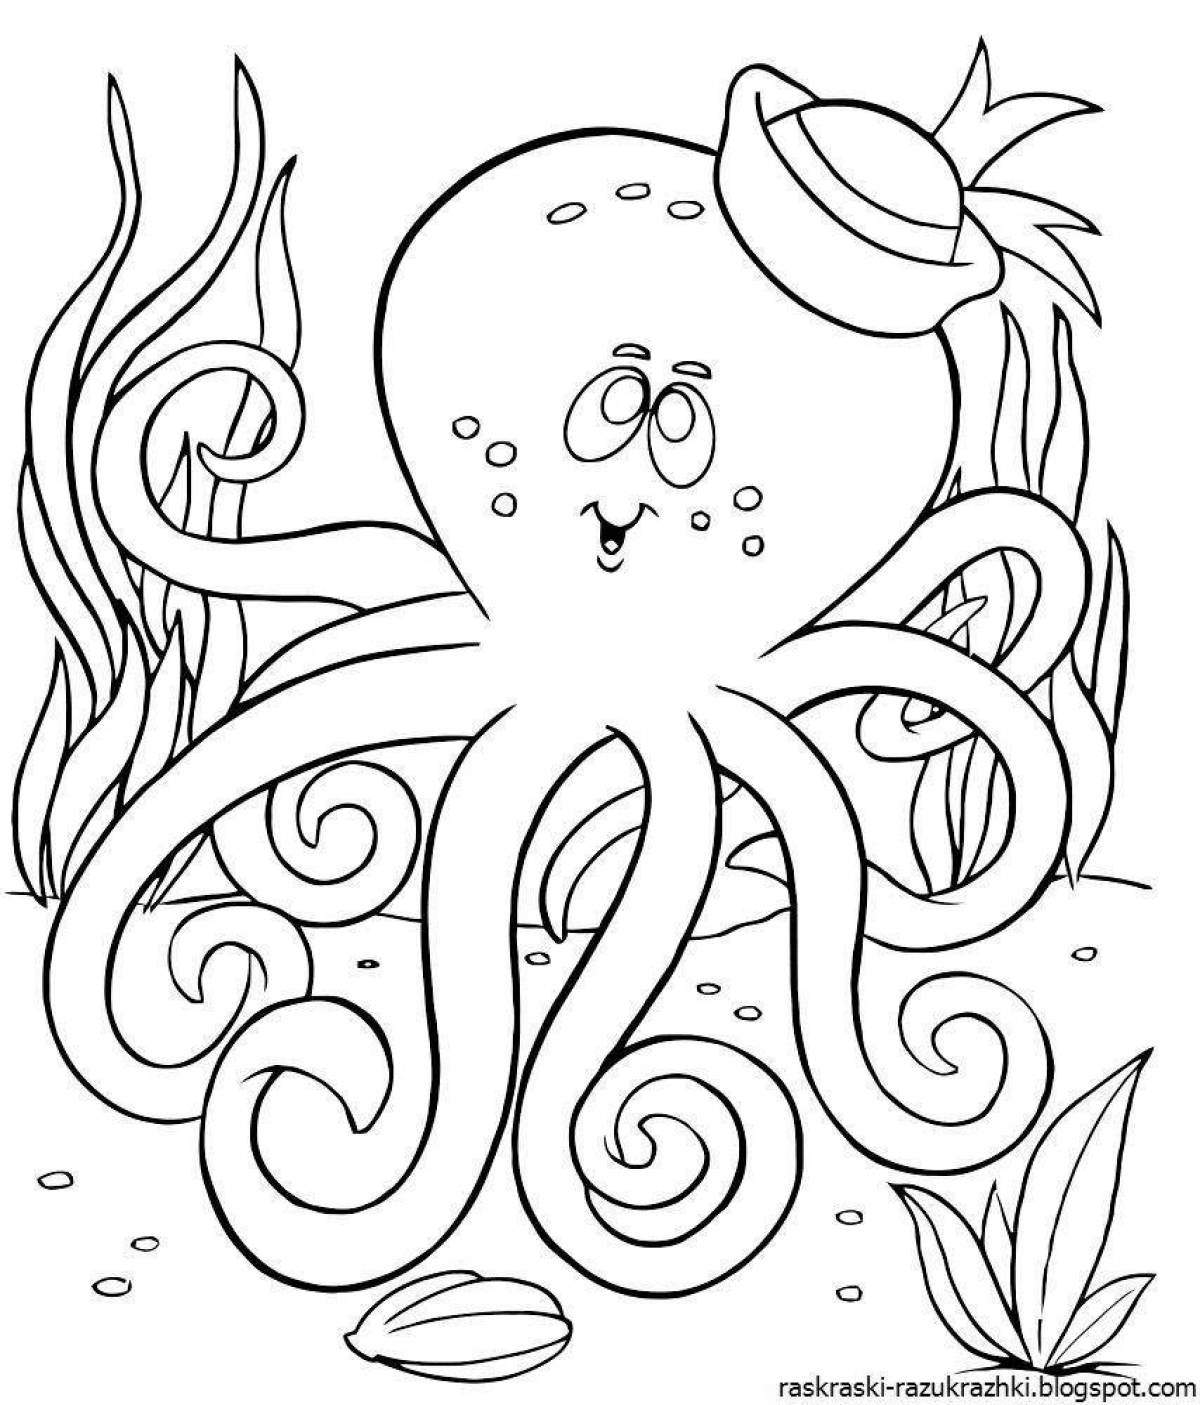 Creative coral reef coloring book for kids